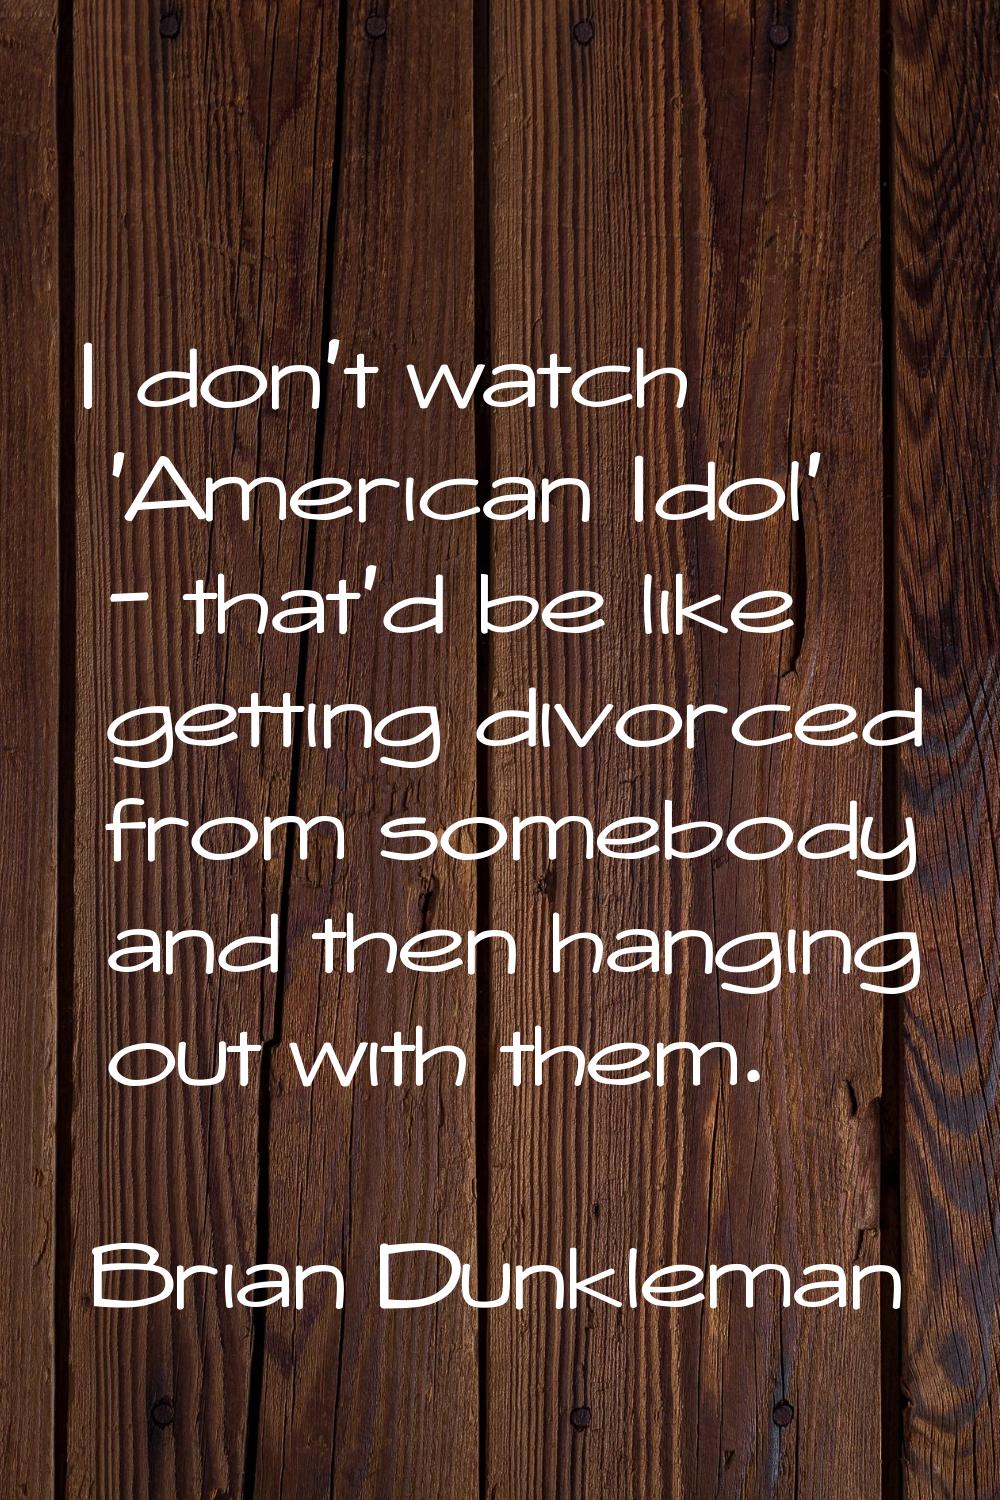 I don't watch 'American Idol' - that'd be like getting divorced from somebody and then hanging out 